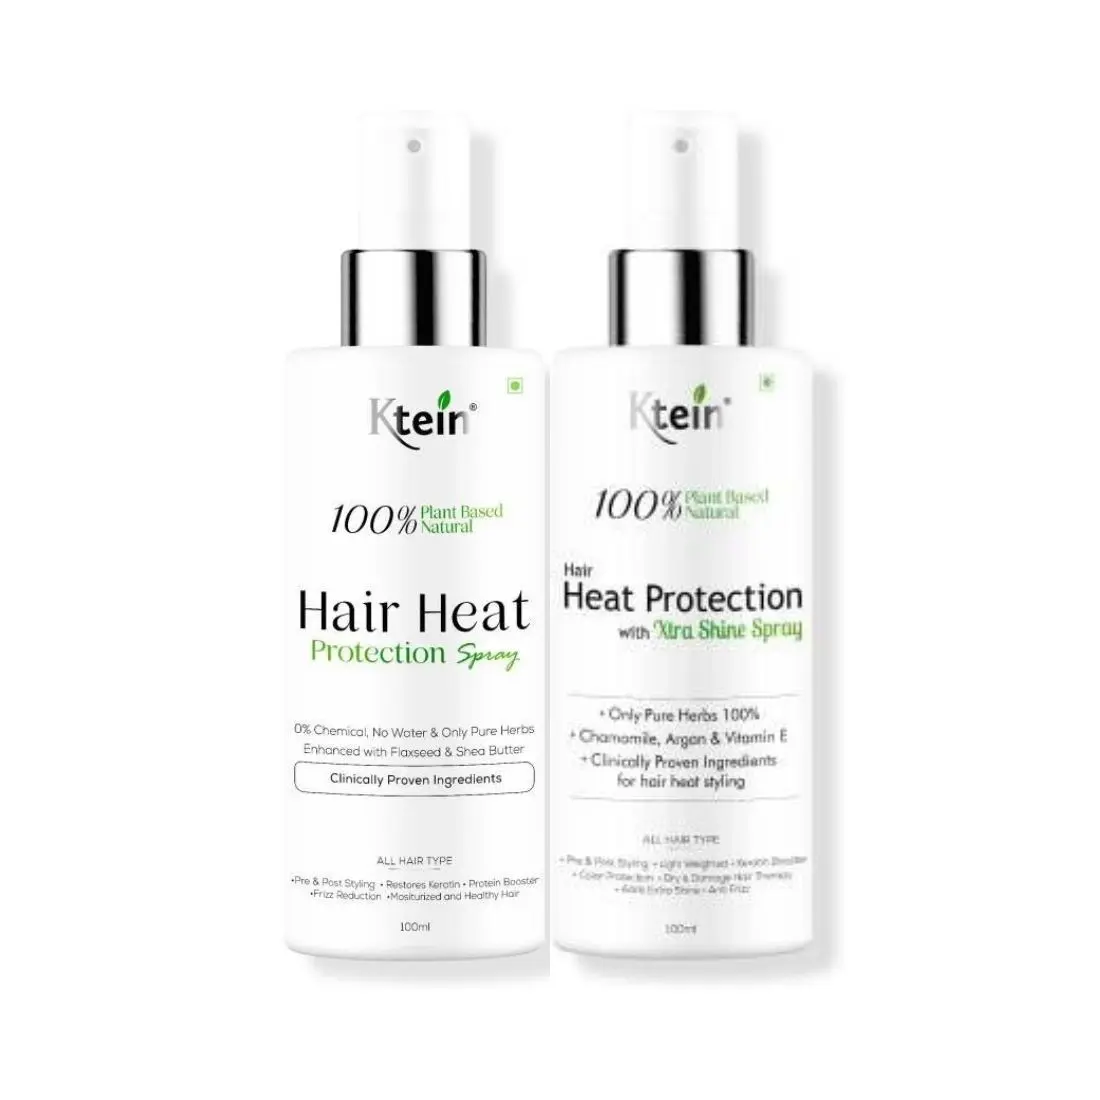 Combo ktein 100% Plant Based Natural Hair Heat ProtectionSpray + Ktein 100% Plant Based Natural Hair Heat Protection With xtra Shine Spray